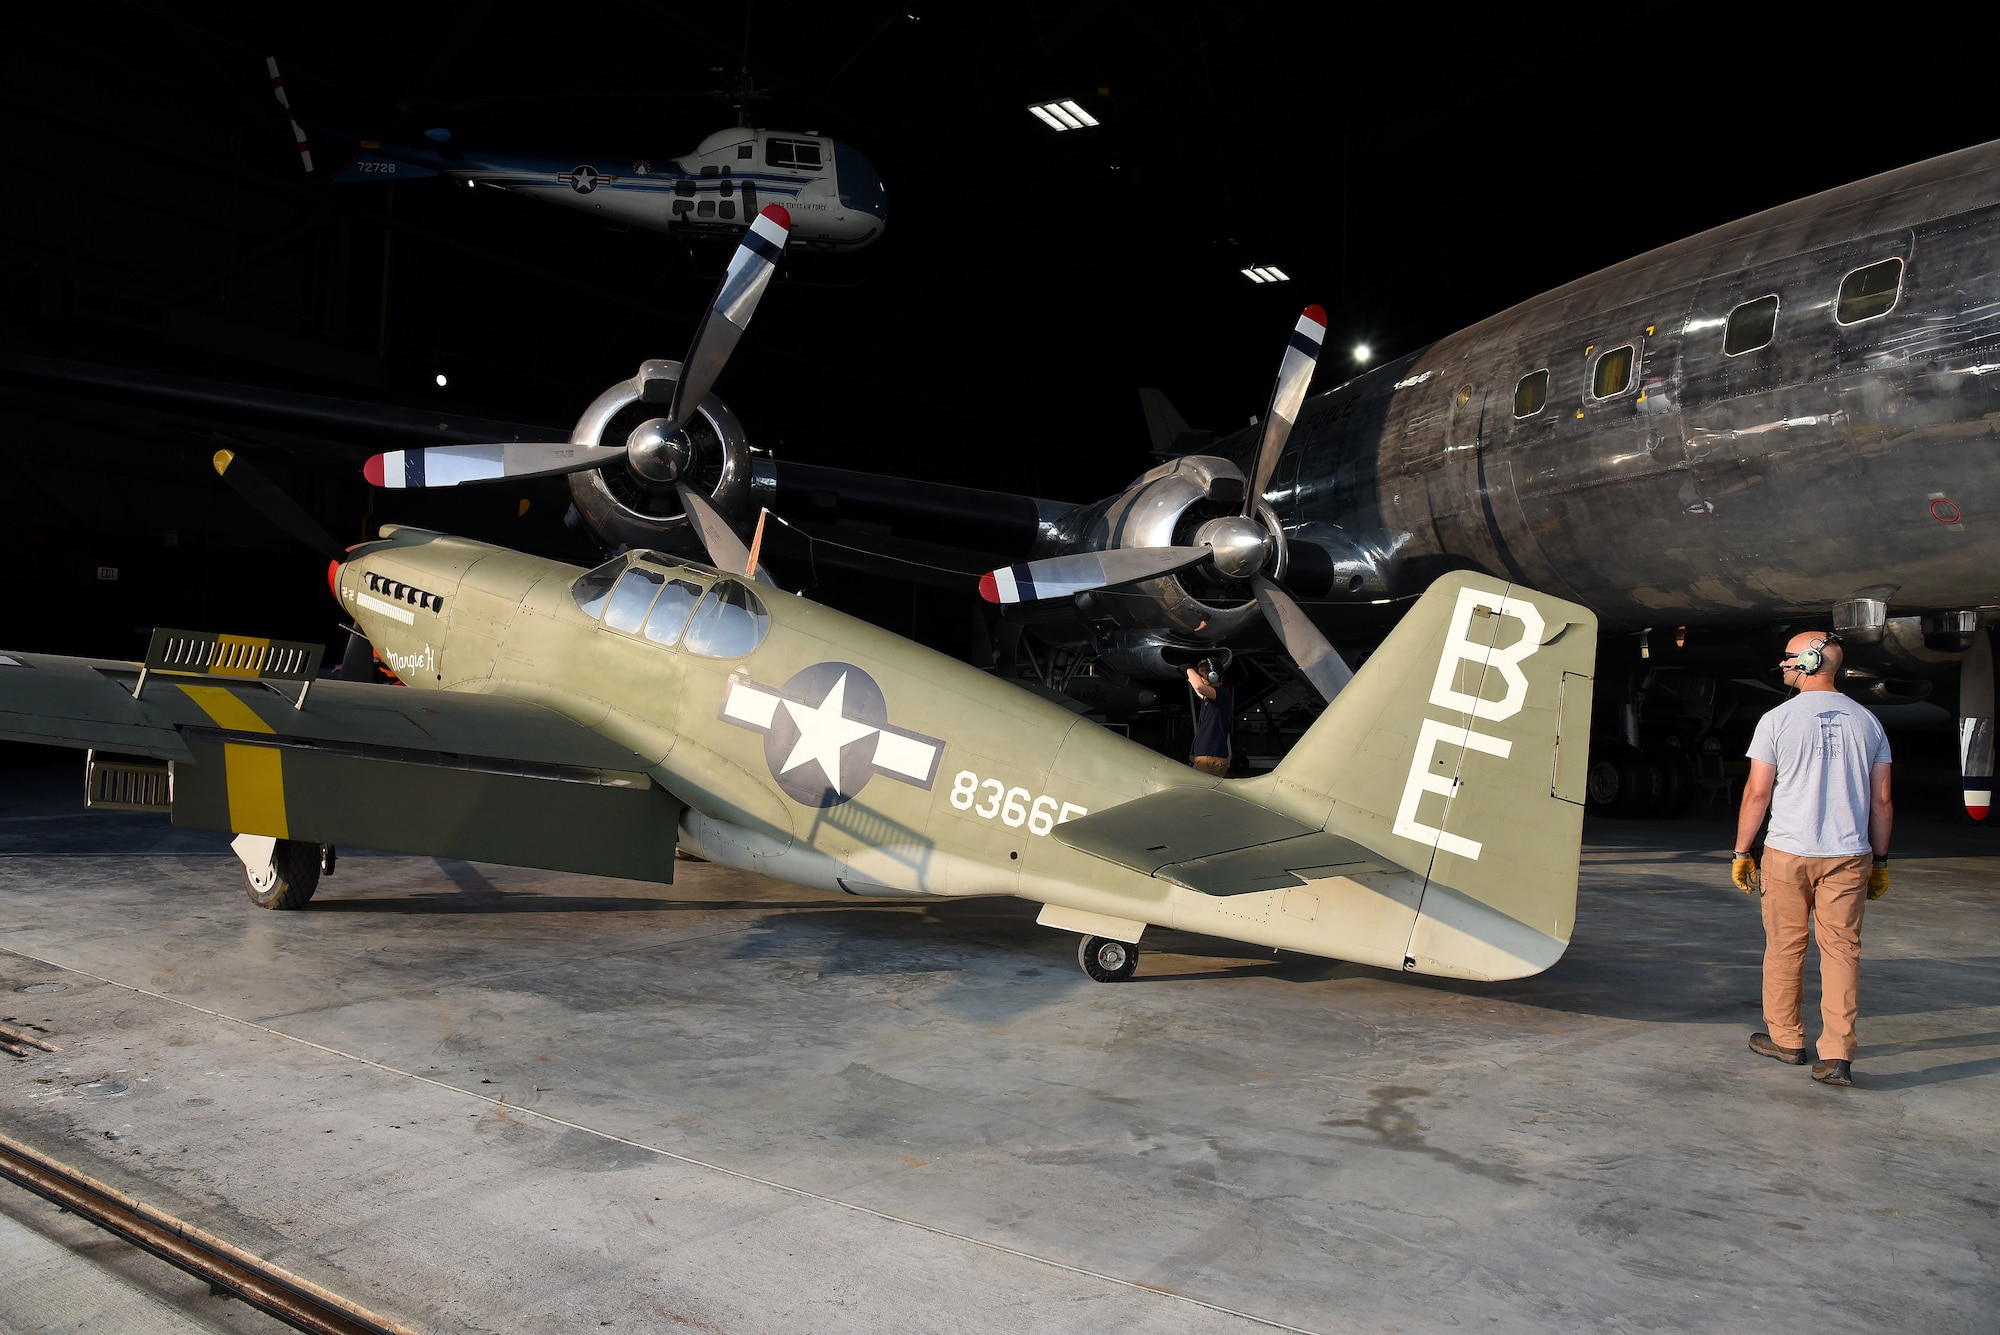 Museum restoration crews prepare to move the North American A-36A Mustang back into the WWII Gallery at the National Museum of the U.S. Air Force on Aug. 13, 2018. Several WWII era aircraft were temporarily placed throughout the museum to provide adequate space for the Memphis Belle exhibit opening events. (U.S. Air Force photo by Ken LaRock)